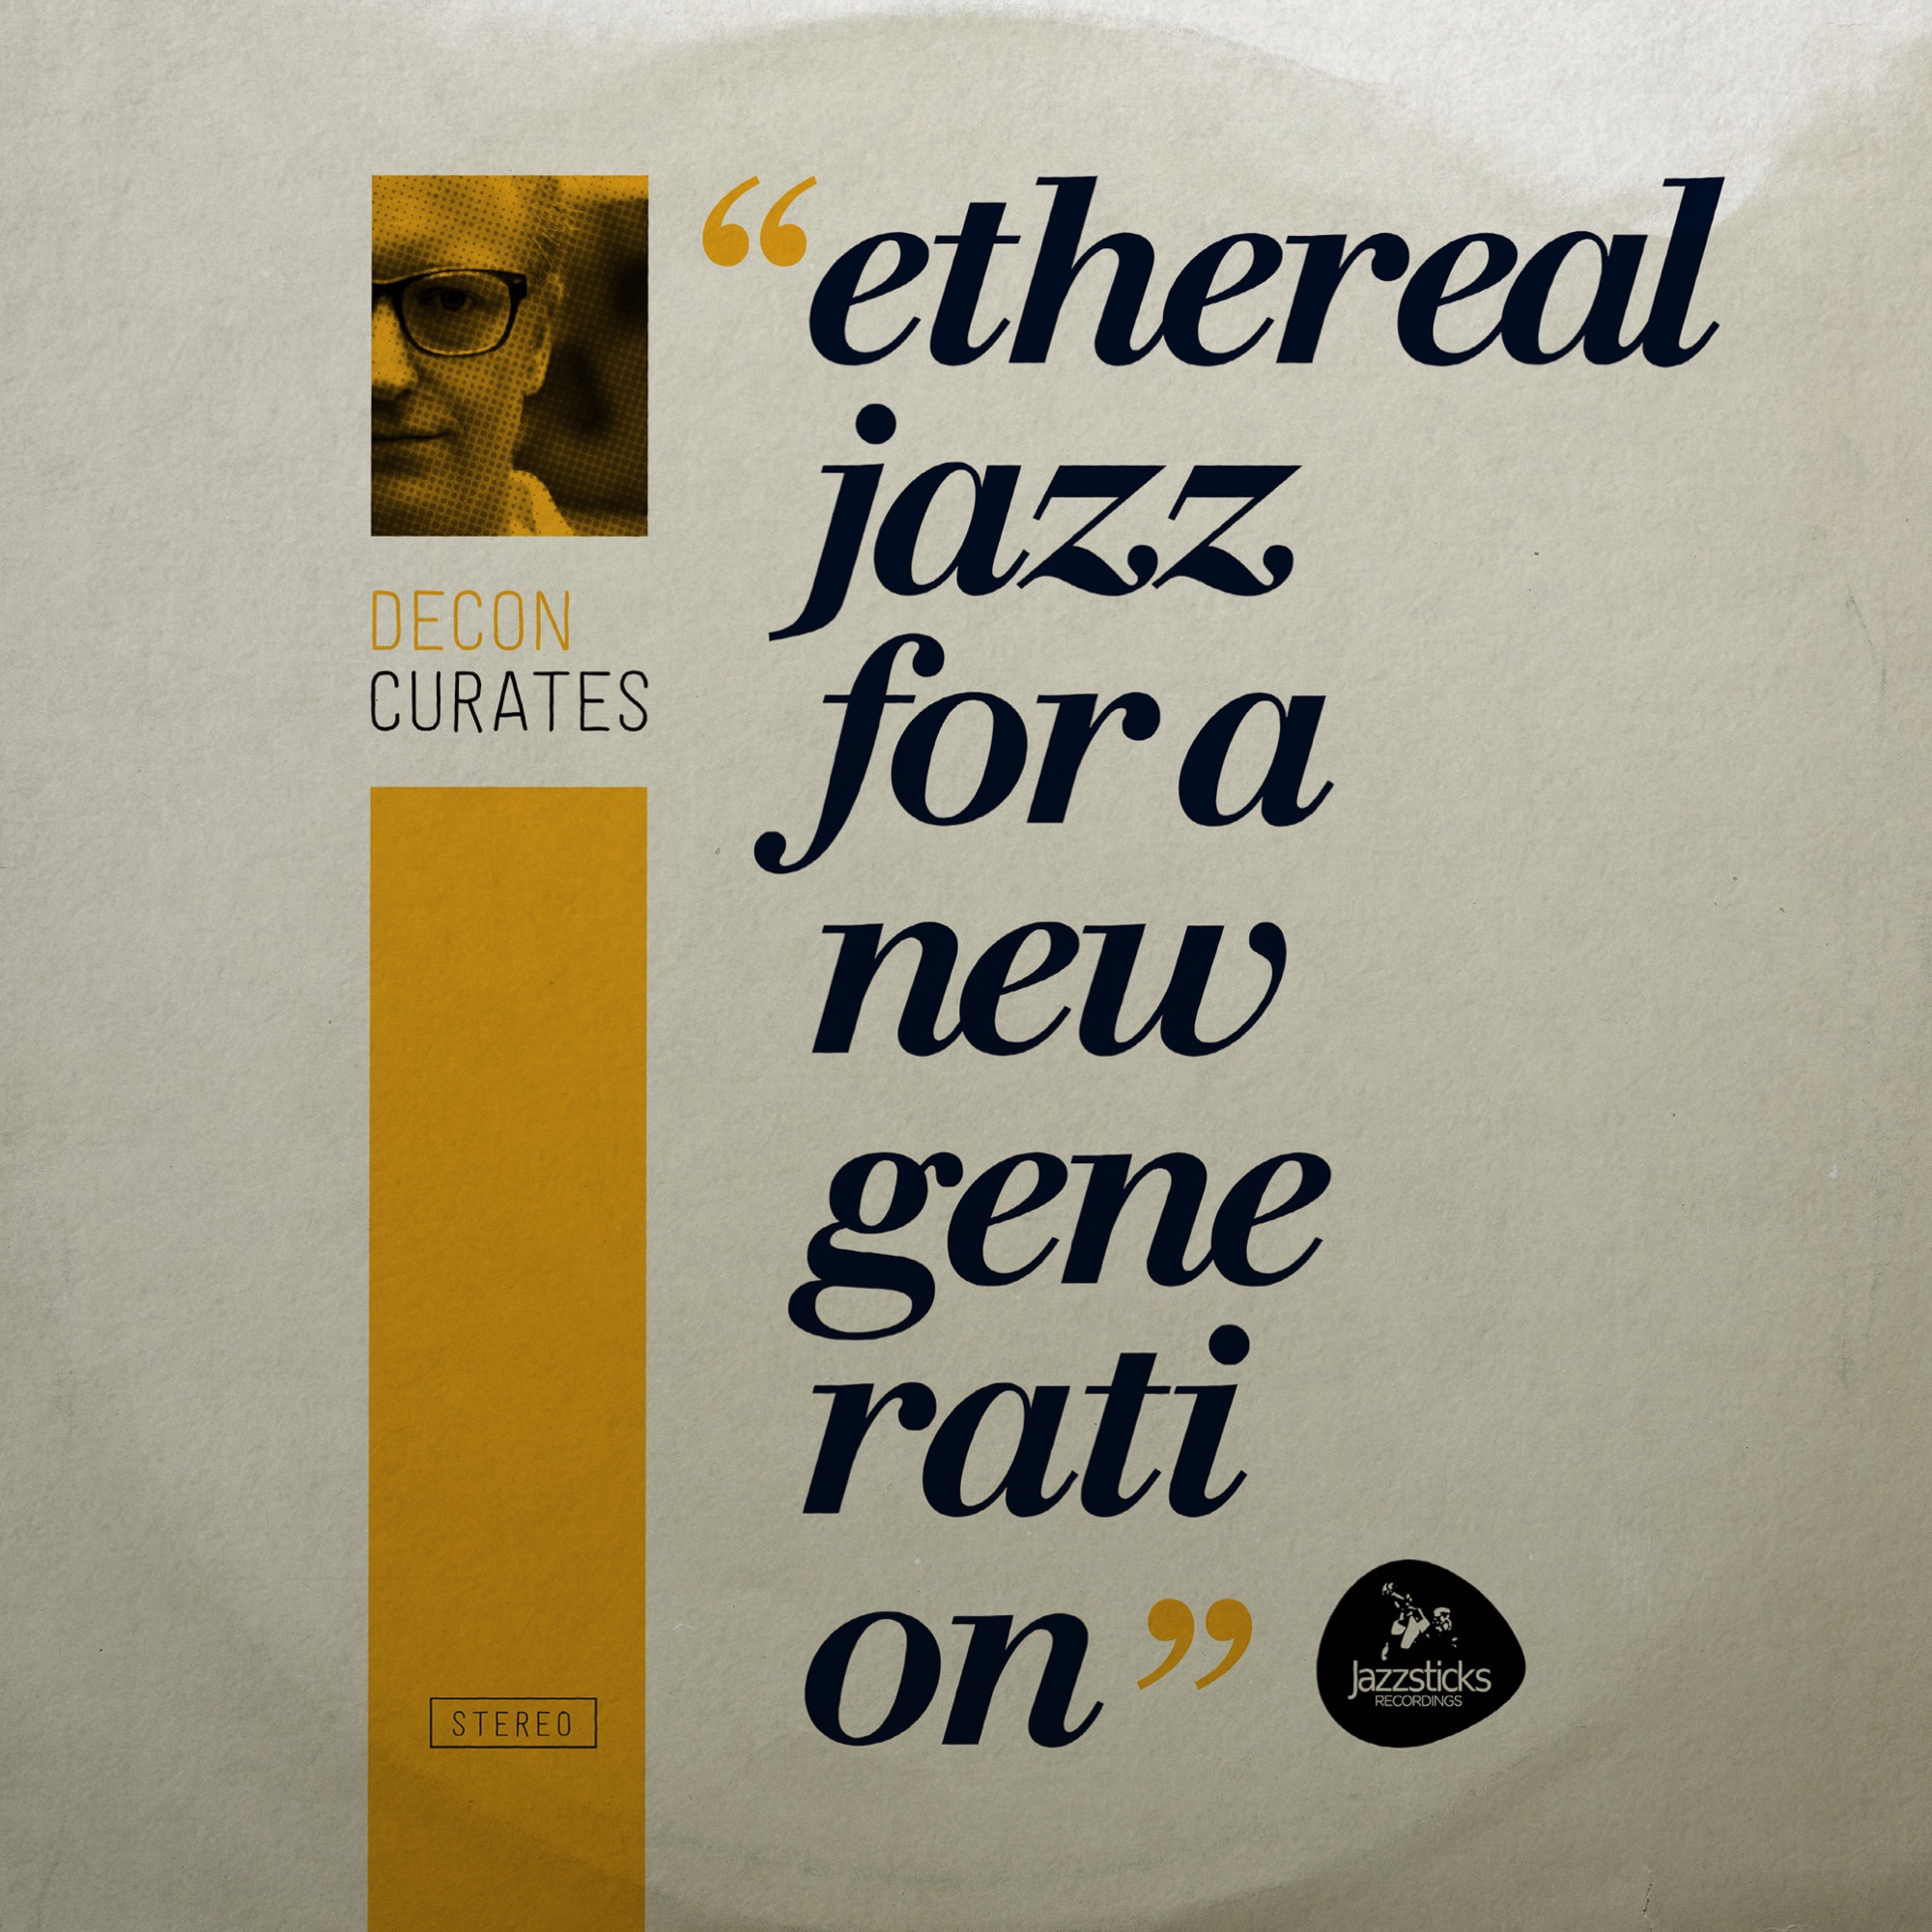 Decon Curates - Ethereal Jazz for a New Generation